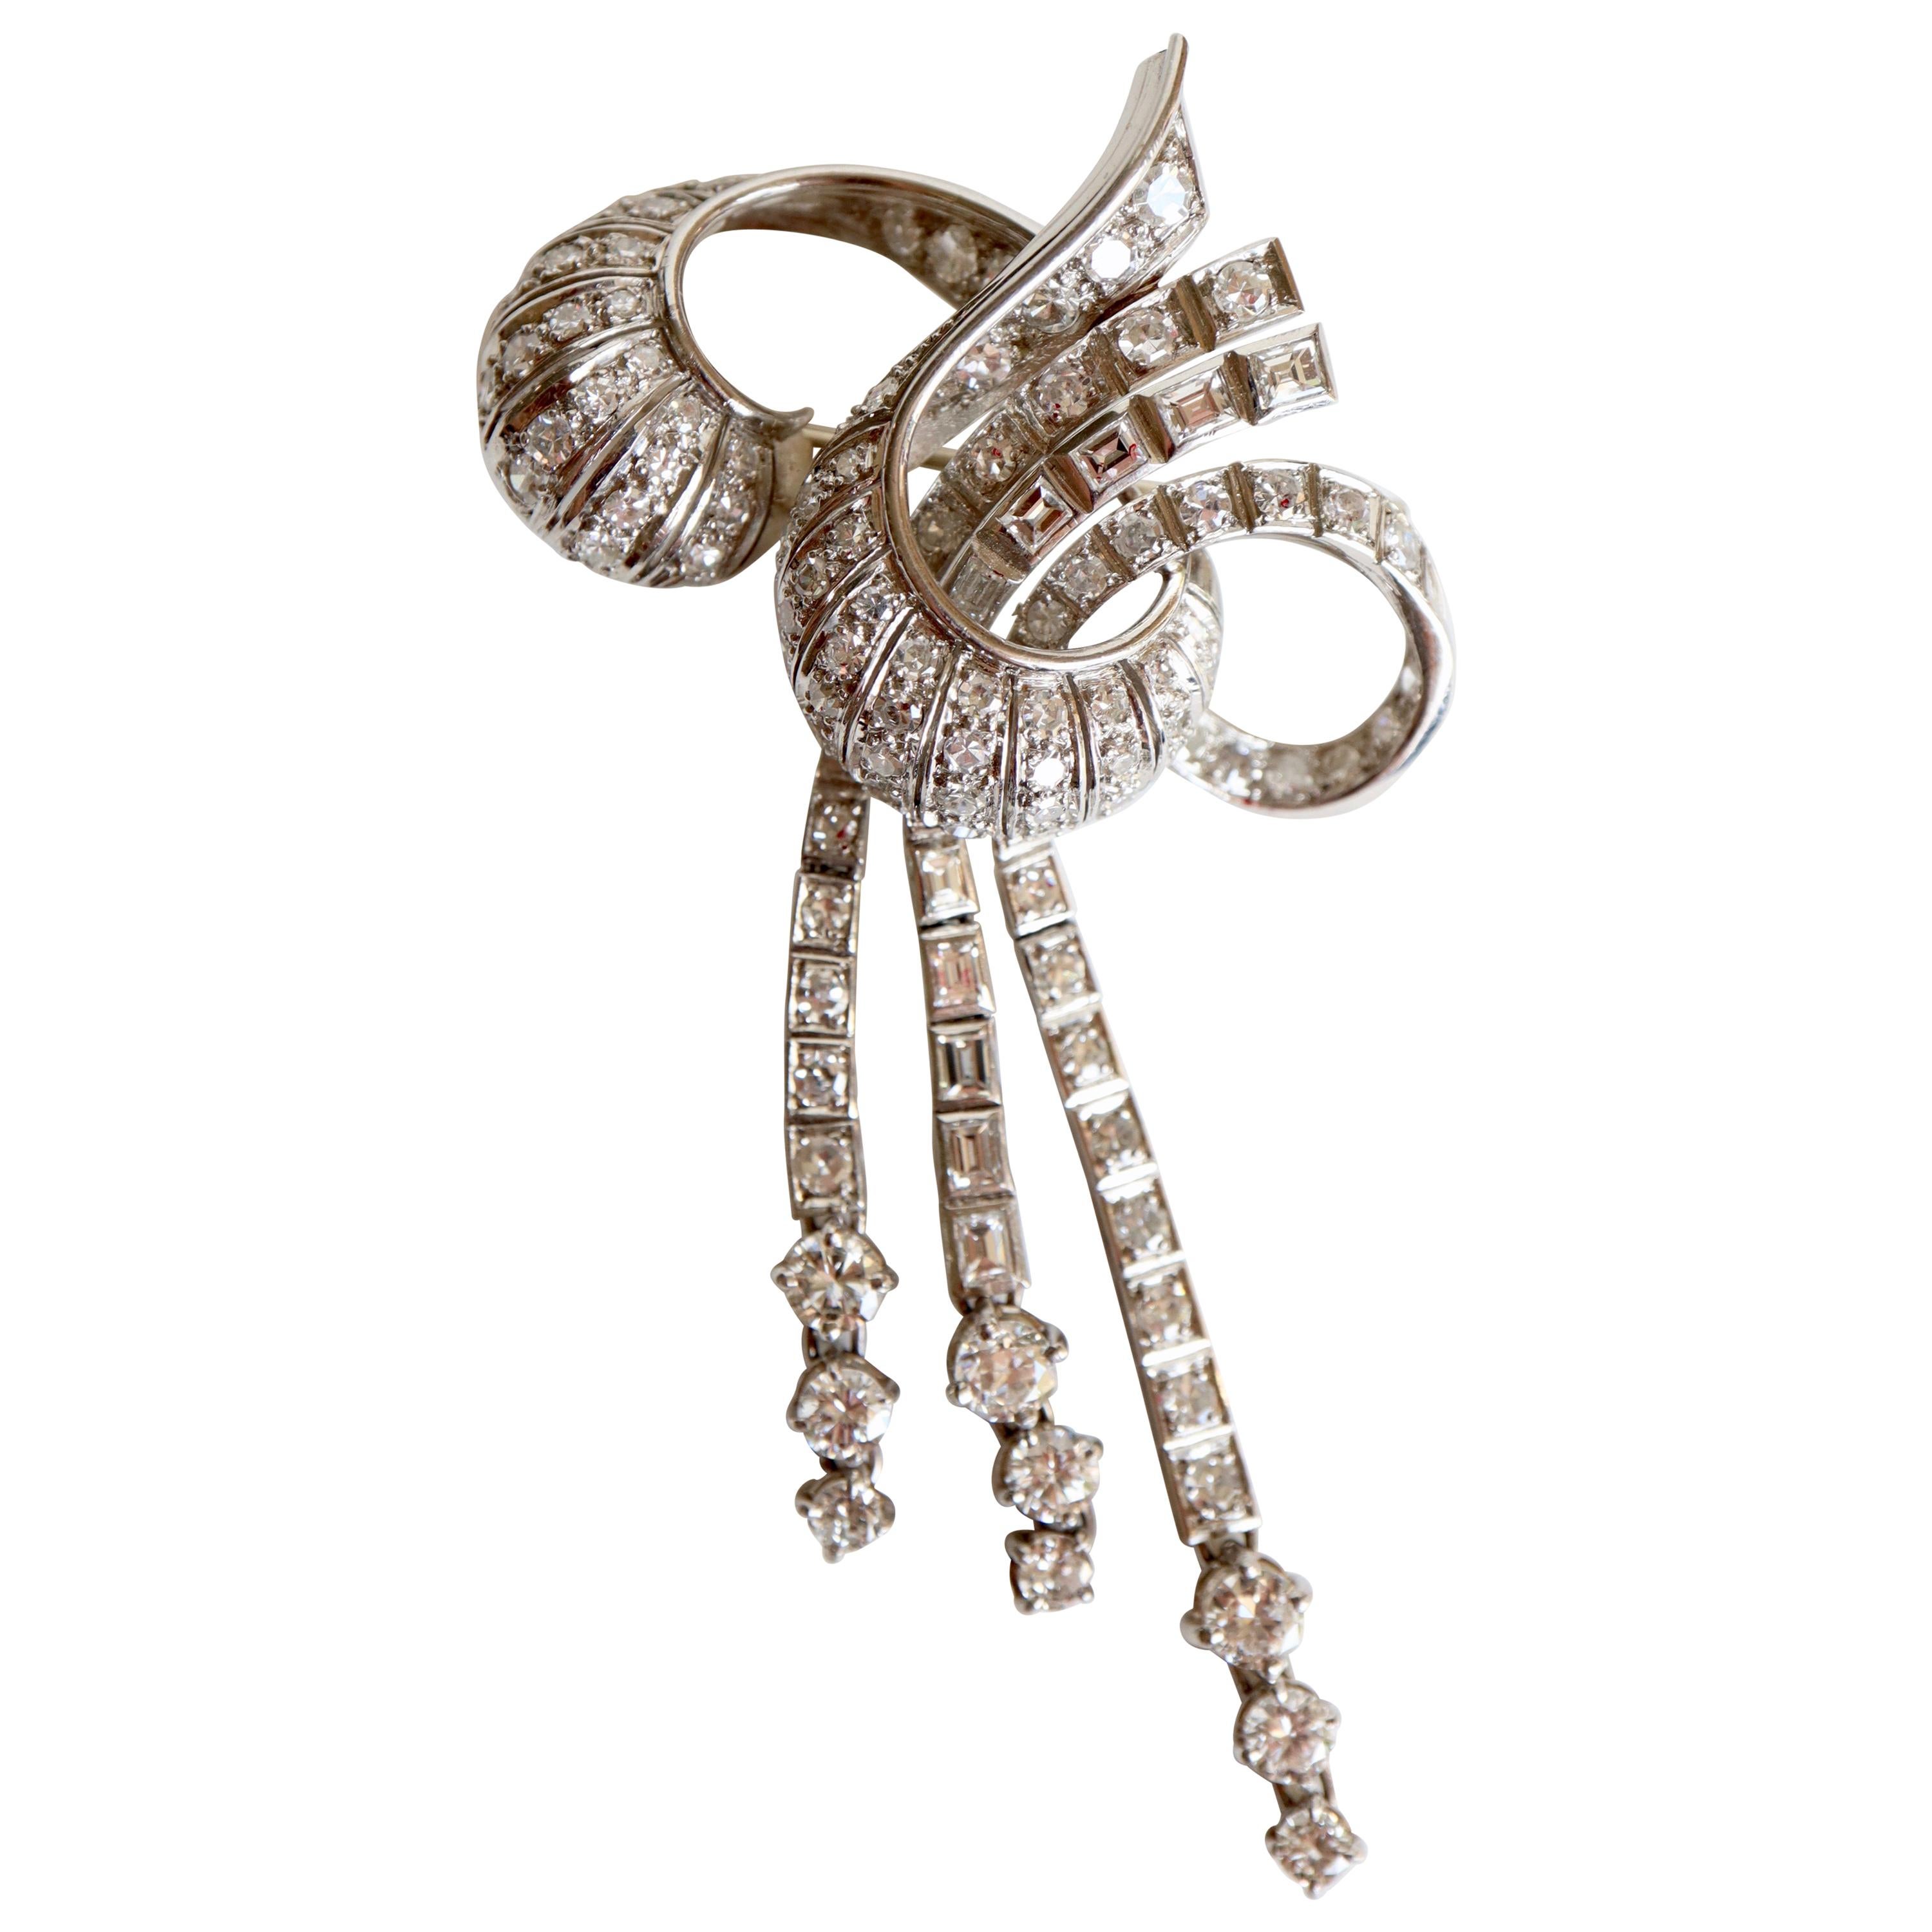 Brooch 1940 in 18 Karat White Gold and 7 Carat of Diamonds